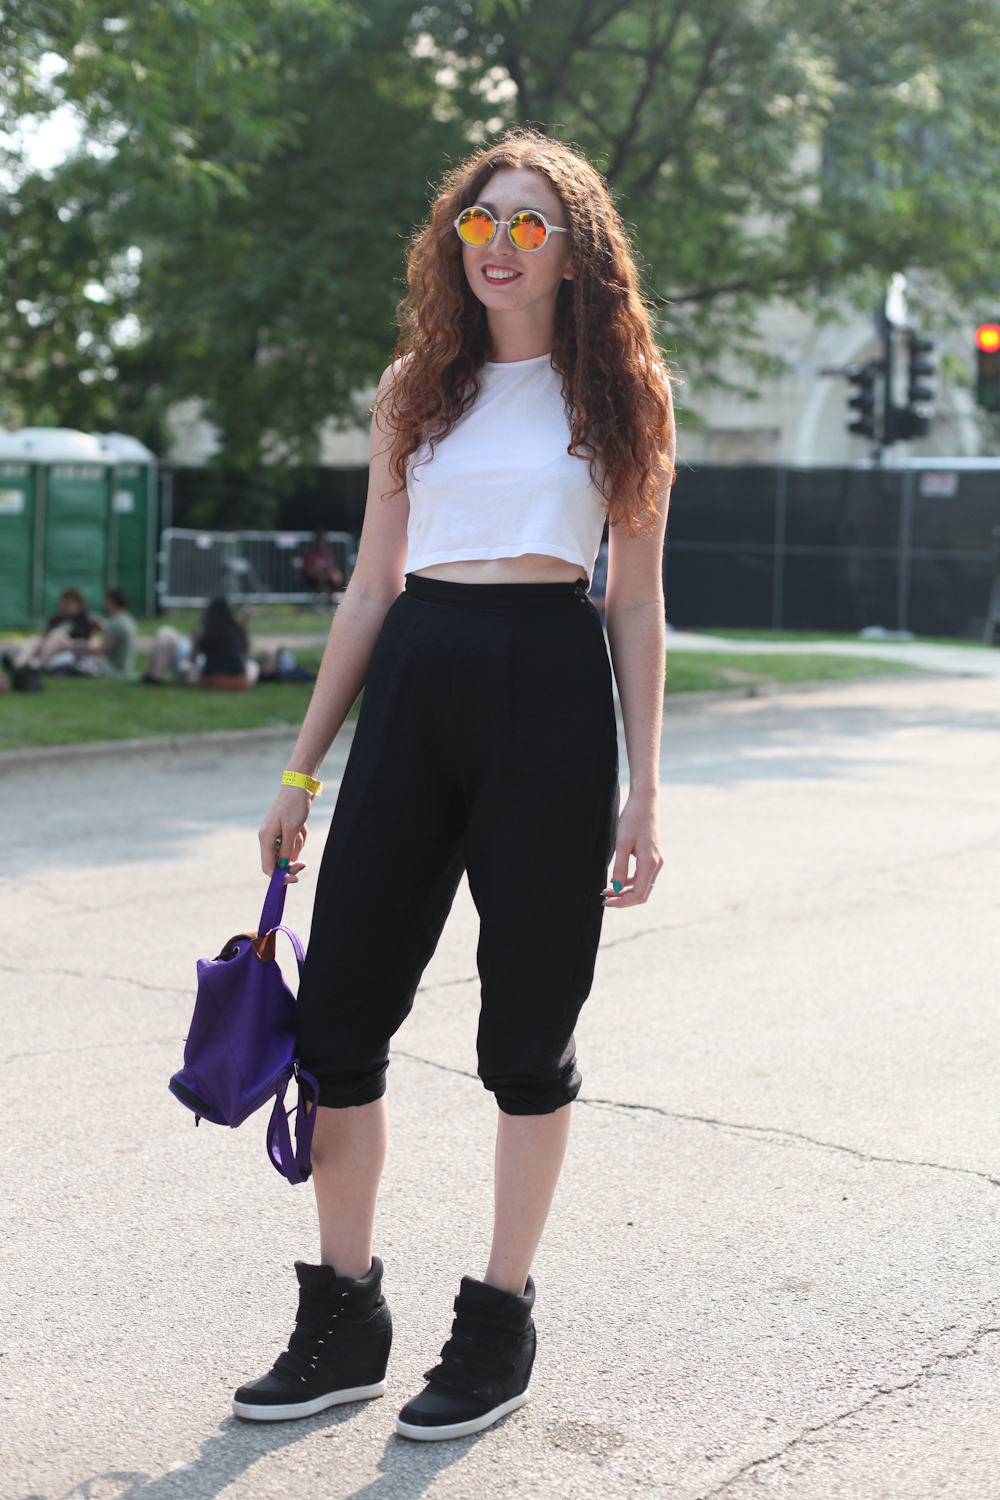 Hermes  Amy Creyer's Chicago Street Style Fashion Blog - Part 3